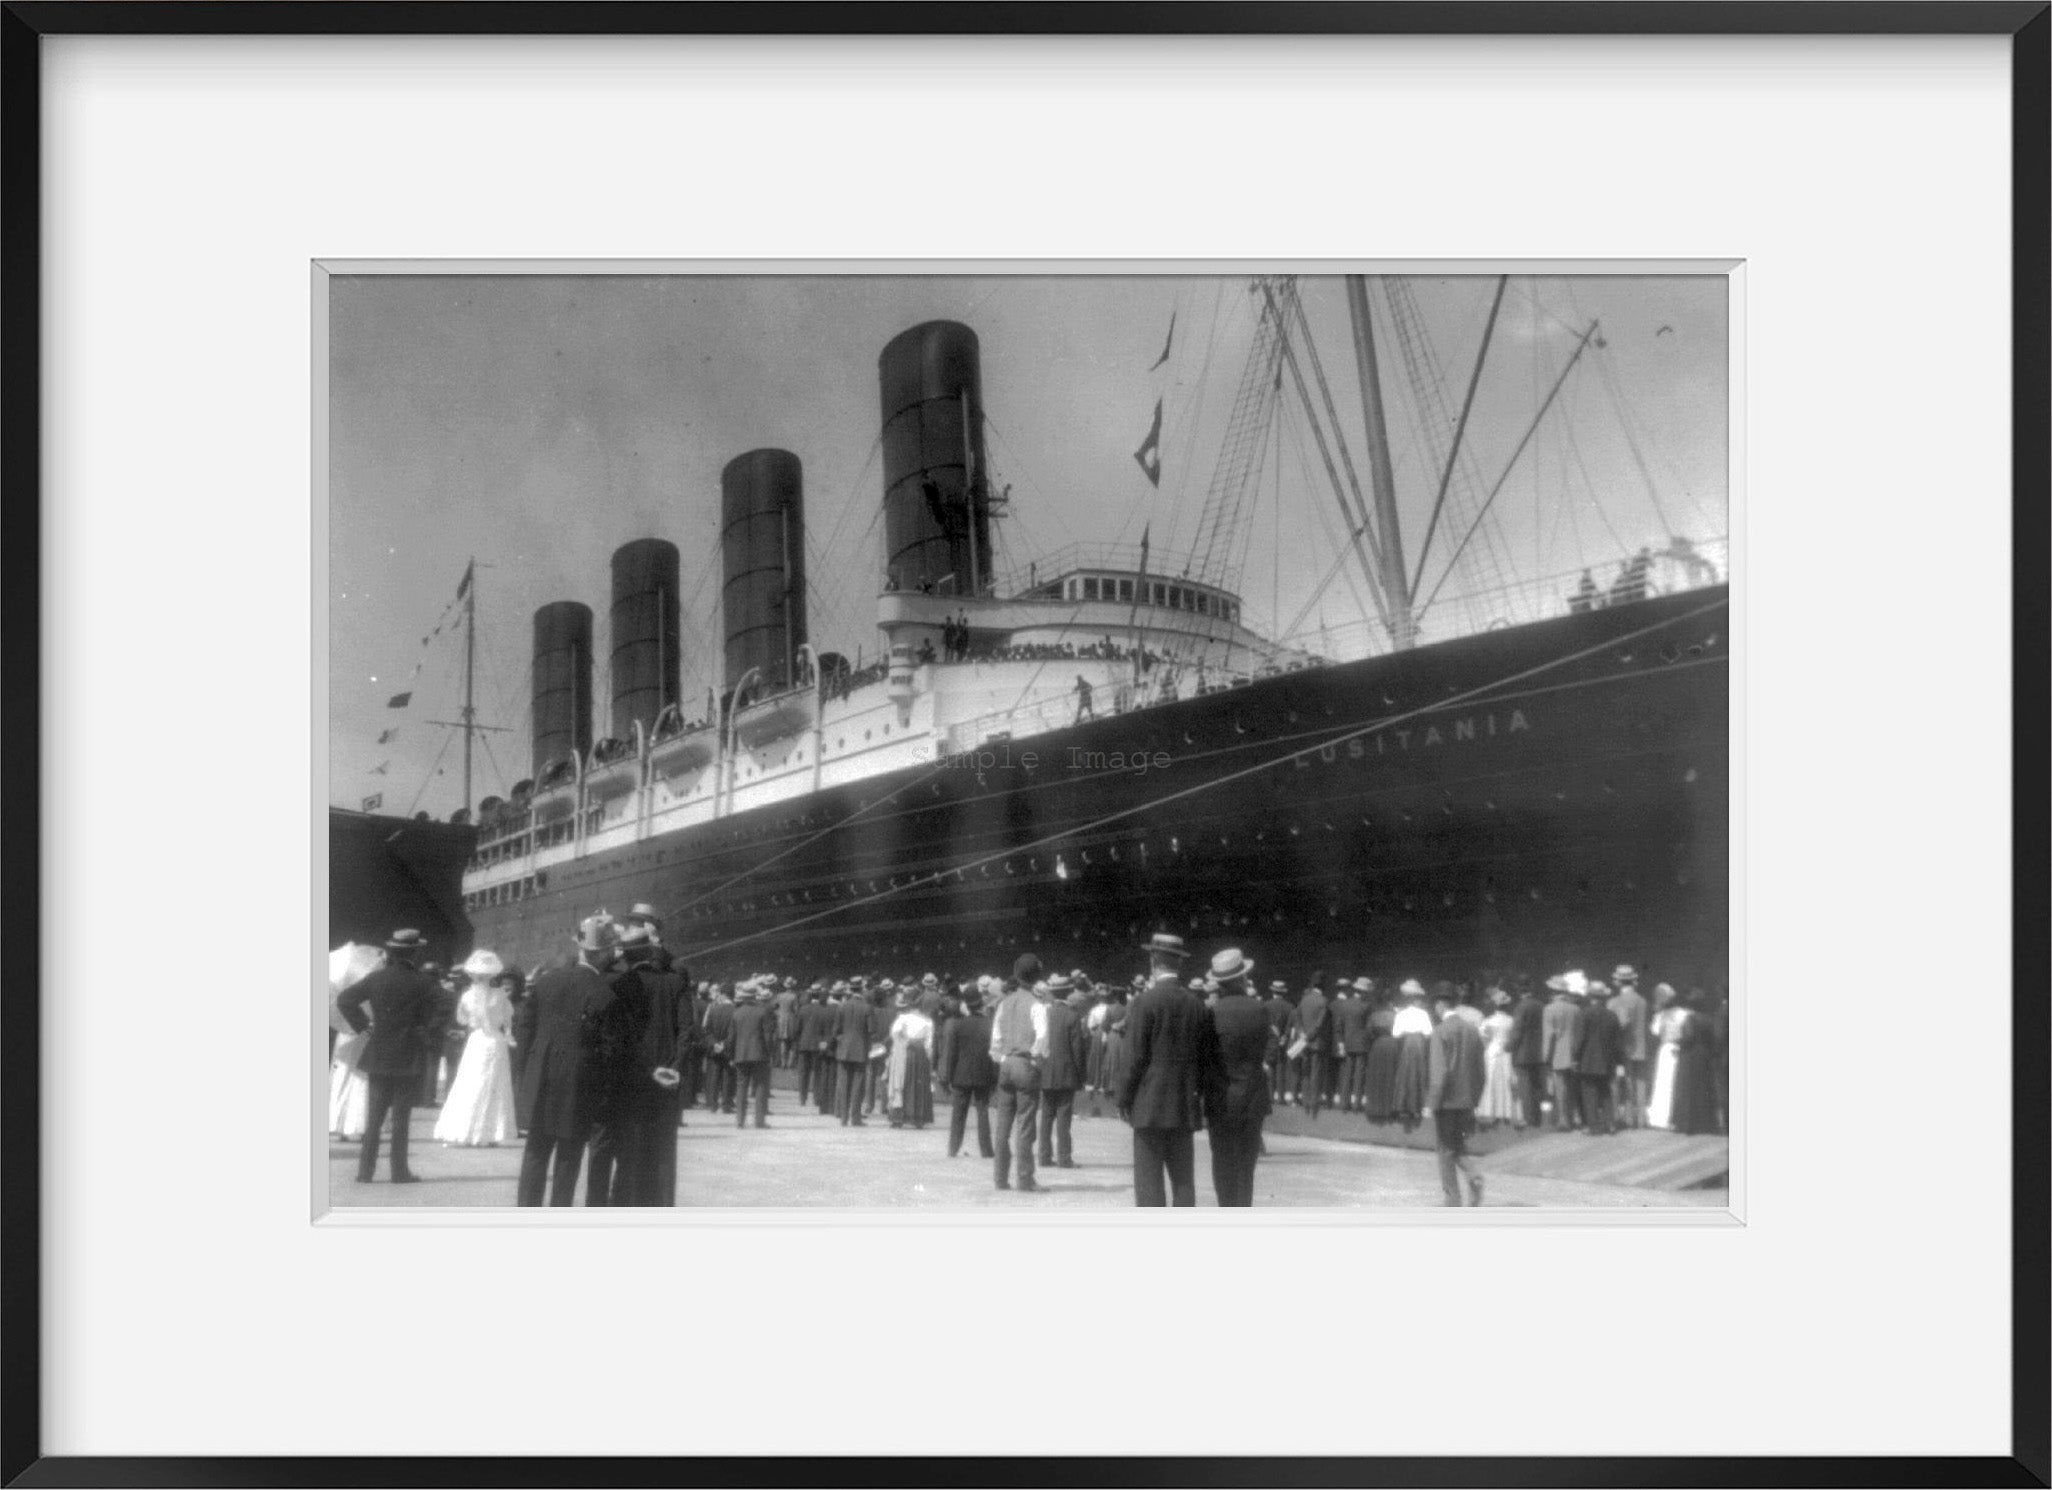 Photo: LUSITANIA arriving in New York, September 13, 1907, Welcoming Crowd, Ship